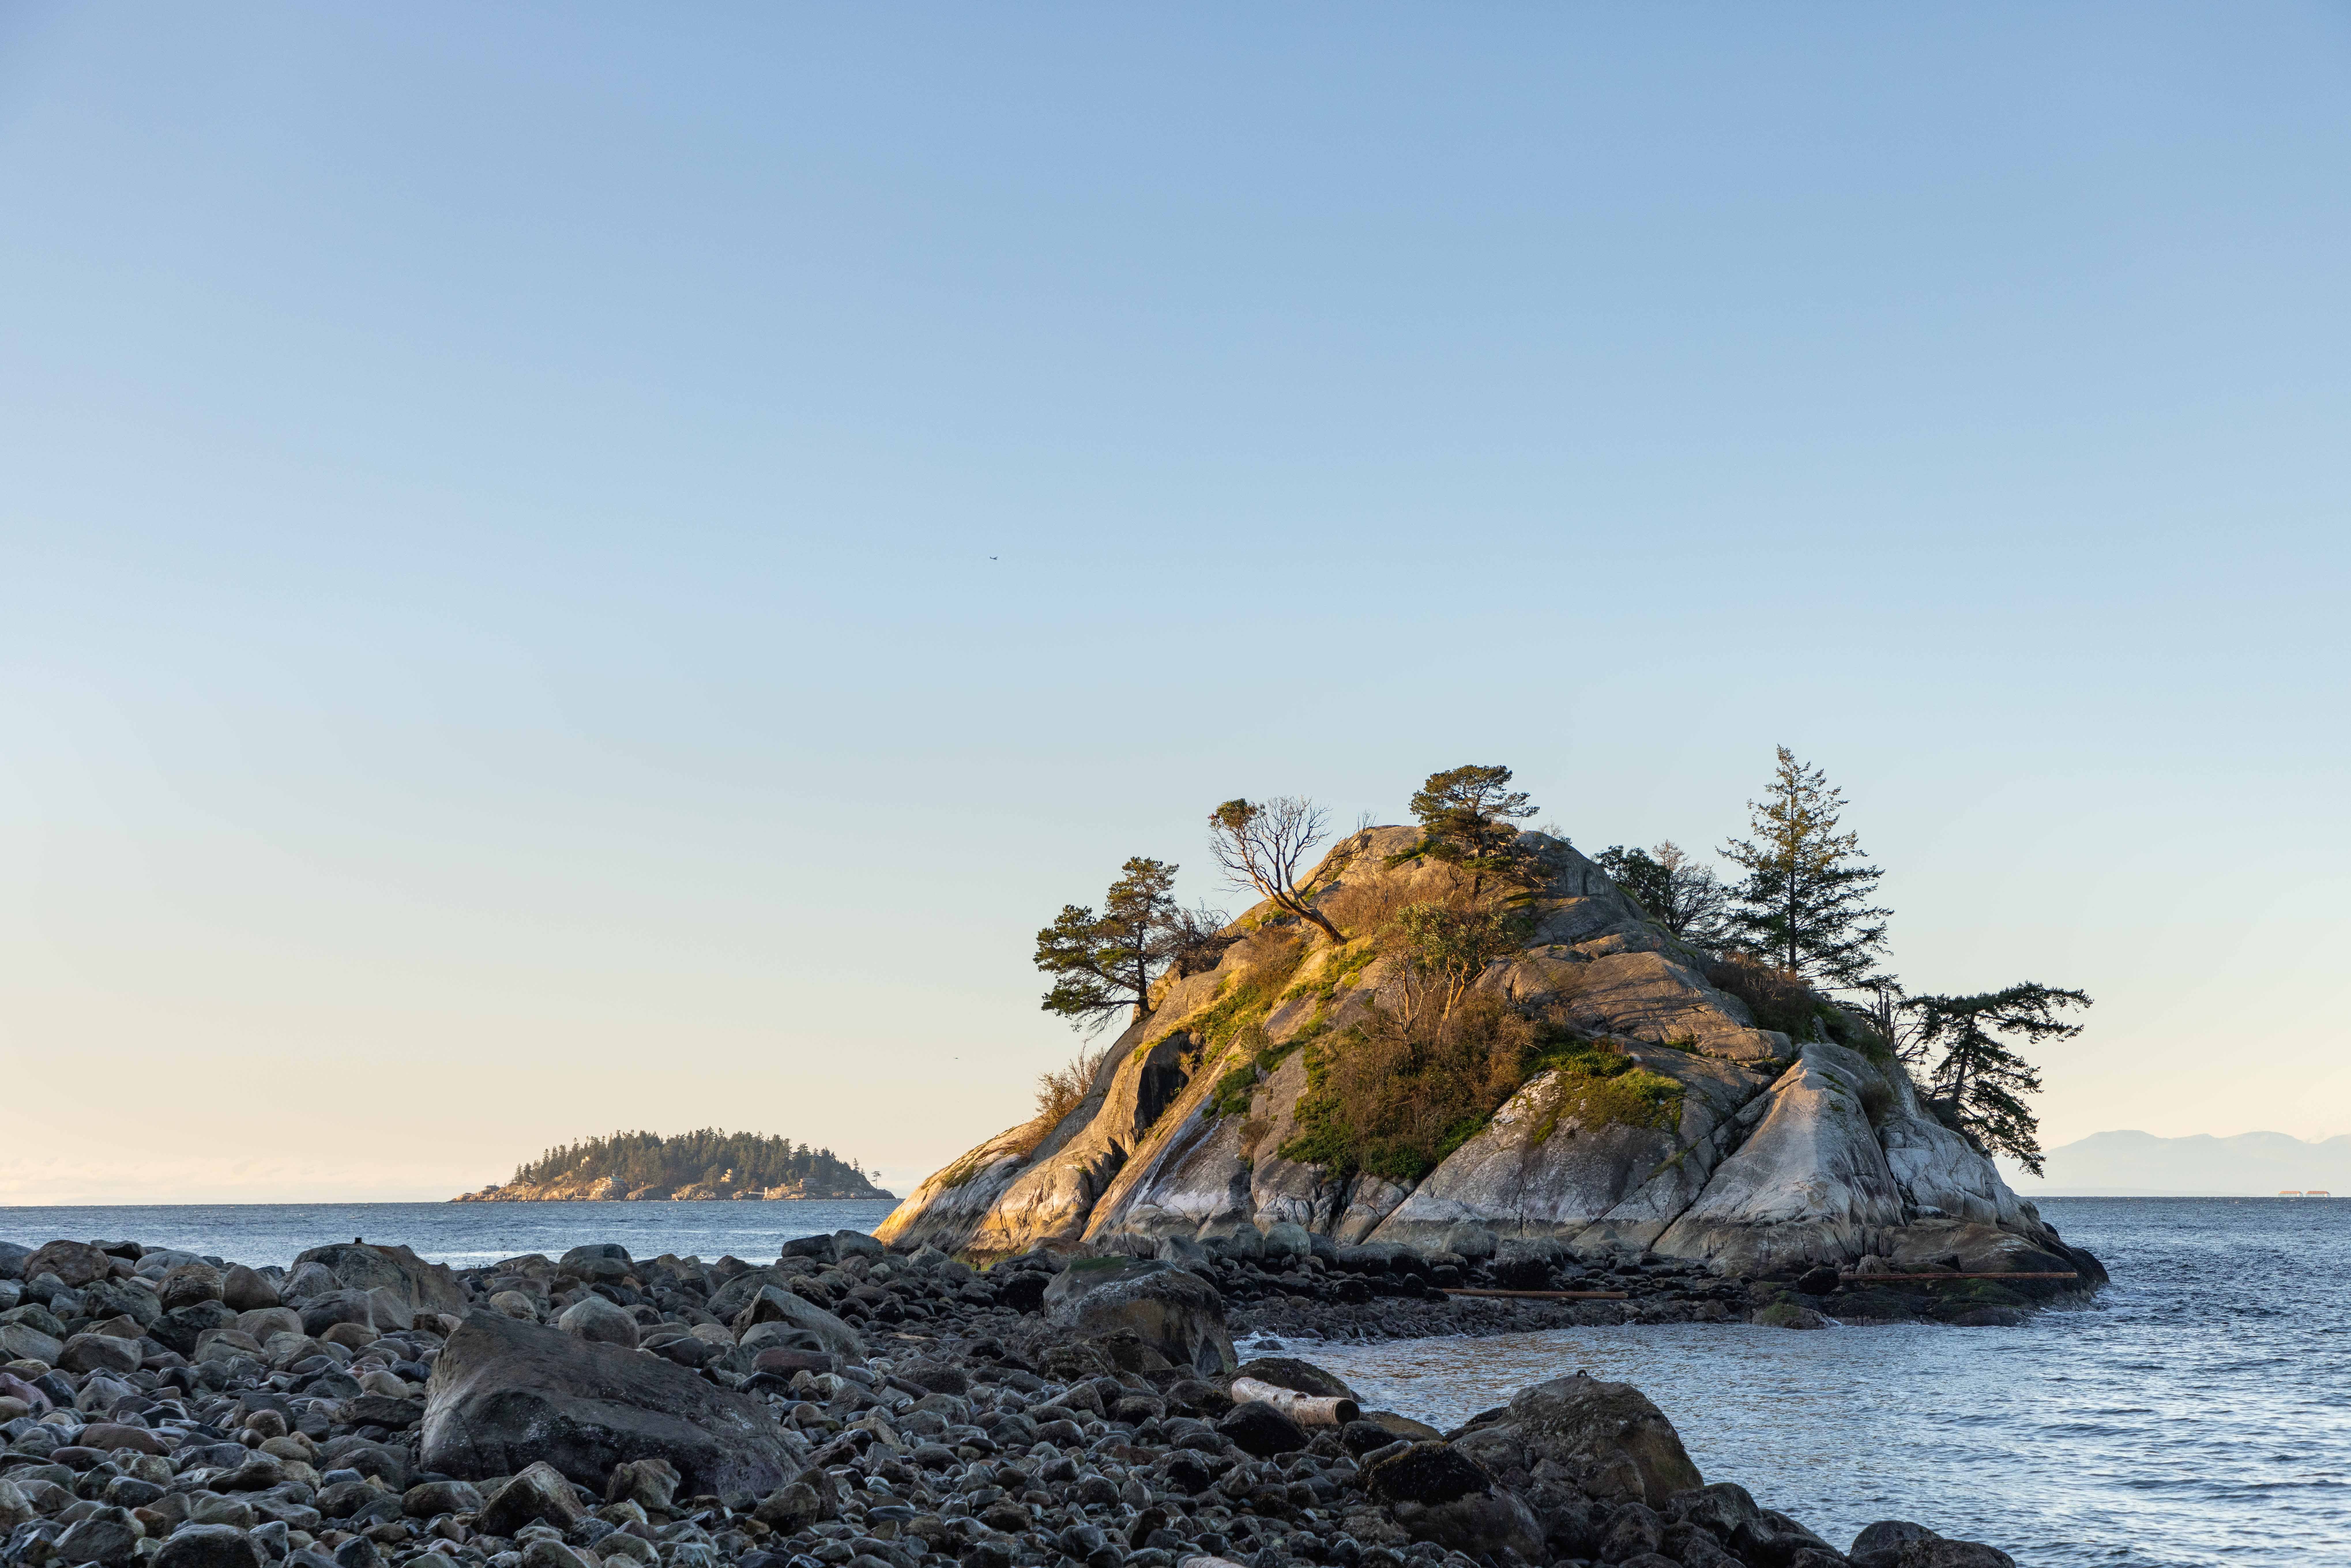 The rising sun shines on the rocky causeway at Whytecliff Park.